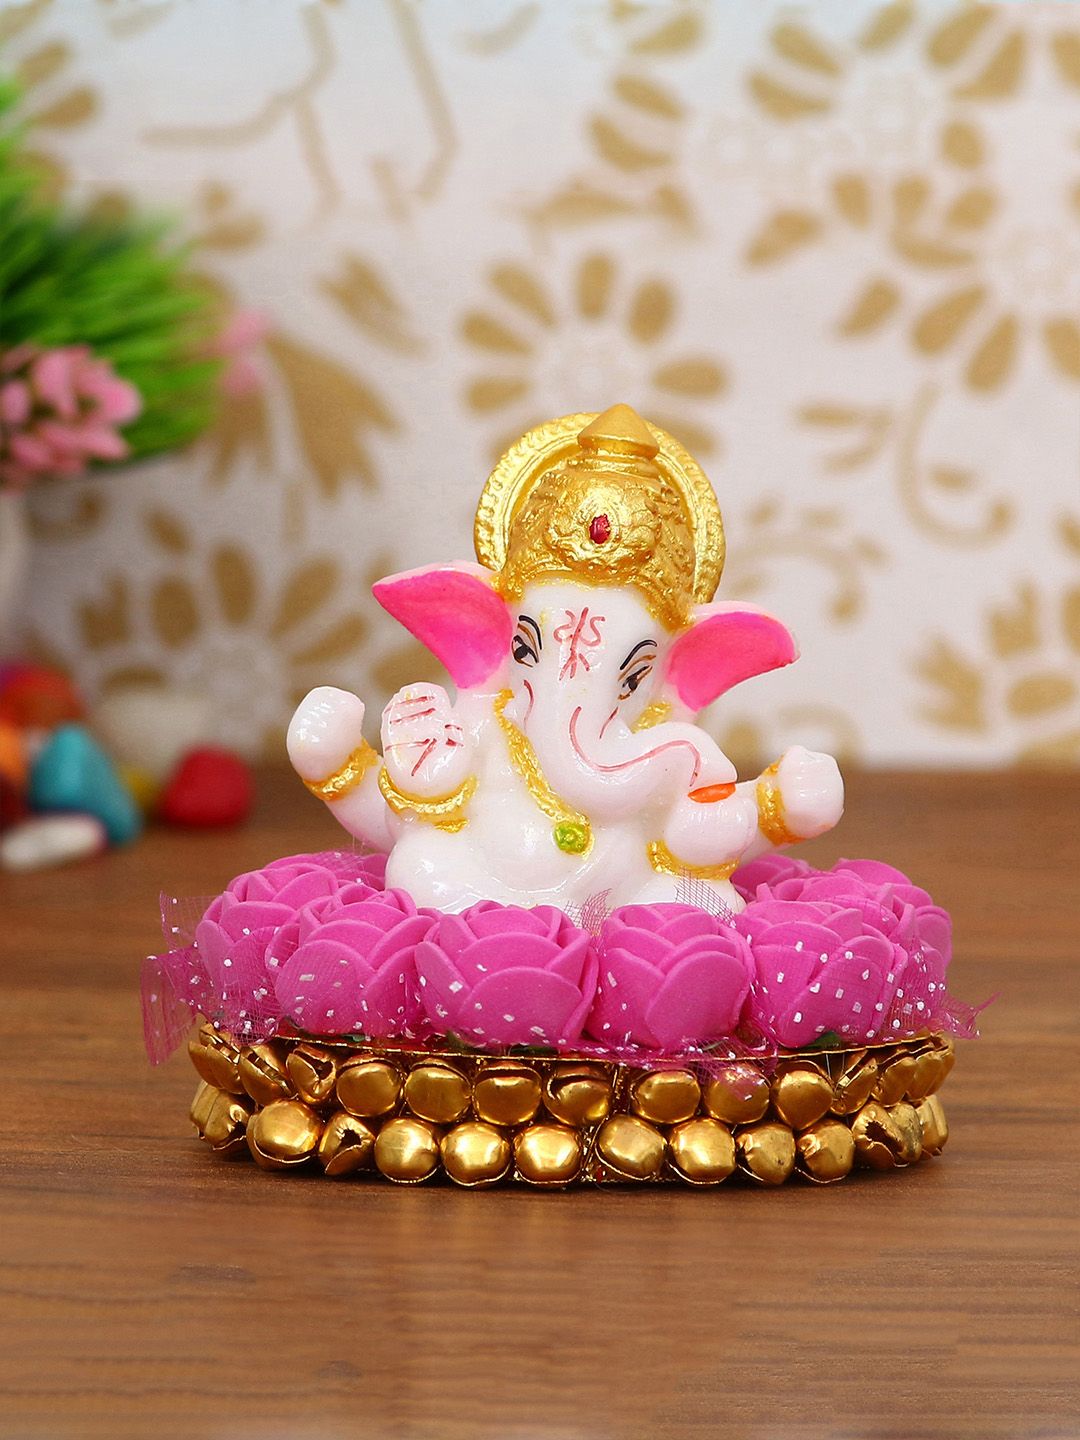 eCraftIndia White & Pink Handcrafted Lord Ganesha Idol On Plate With Flowers Showpiece Price in India